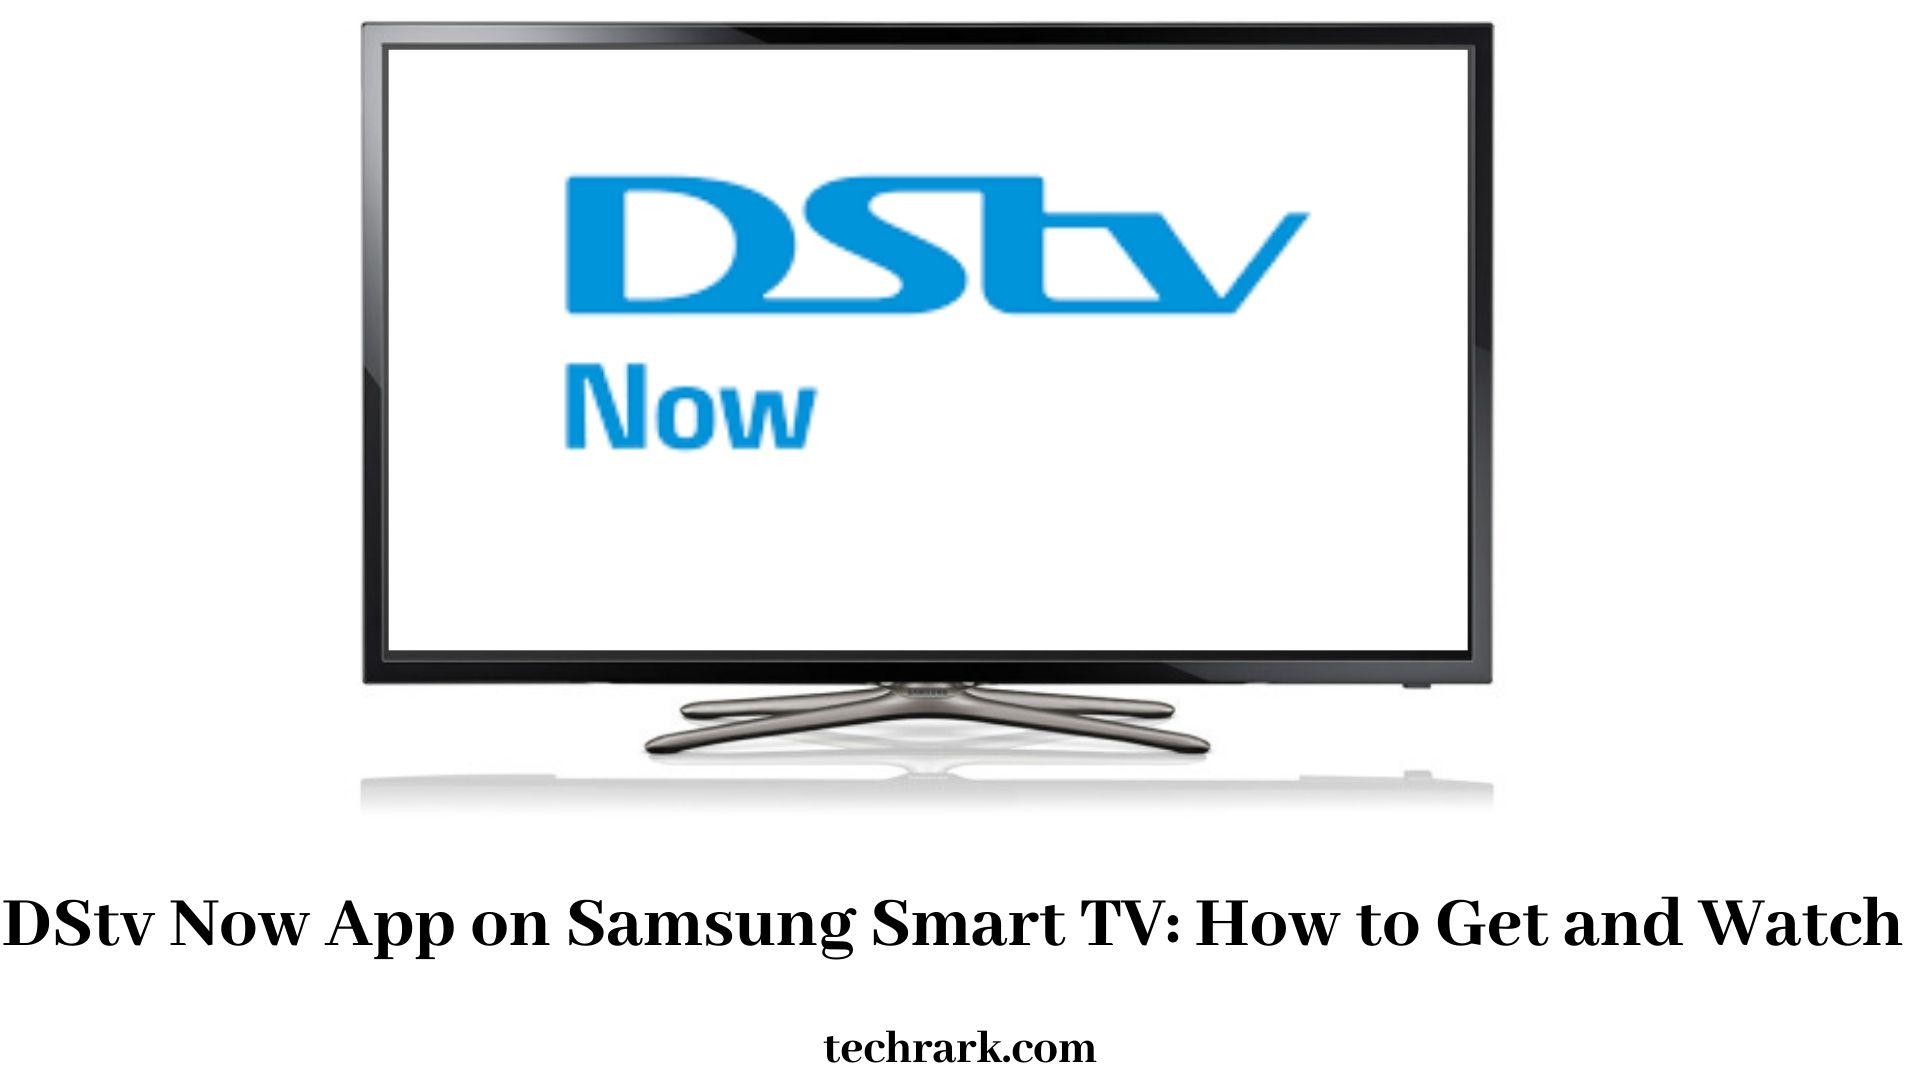 DStv Now App on Samsung Smart TV How to Get and Watch